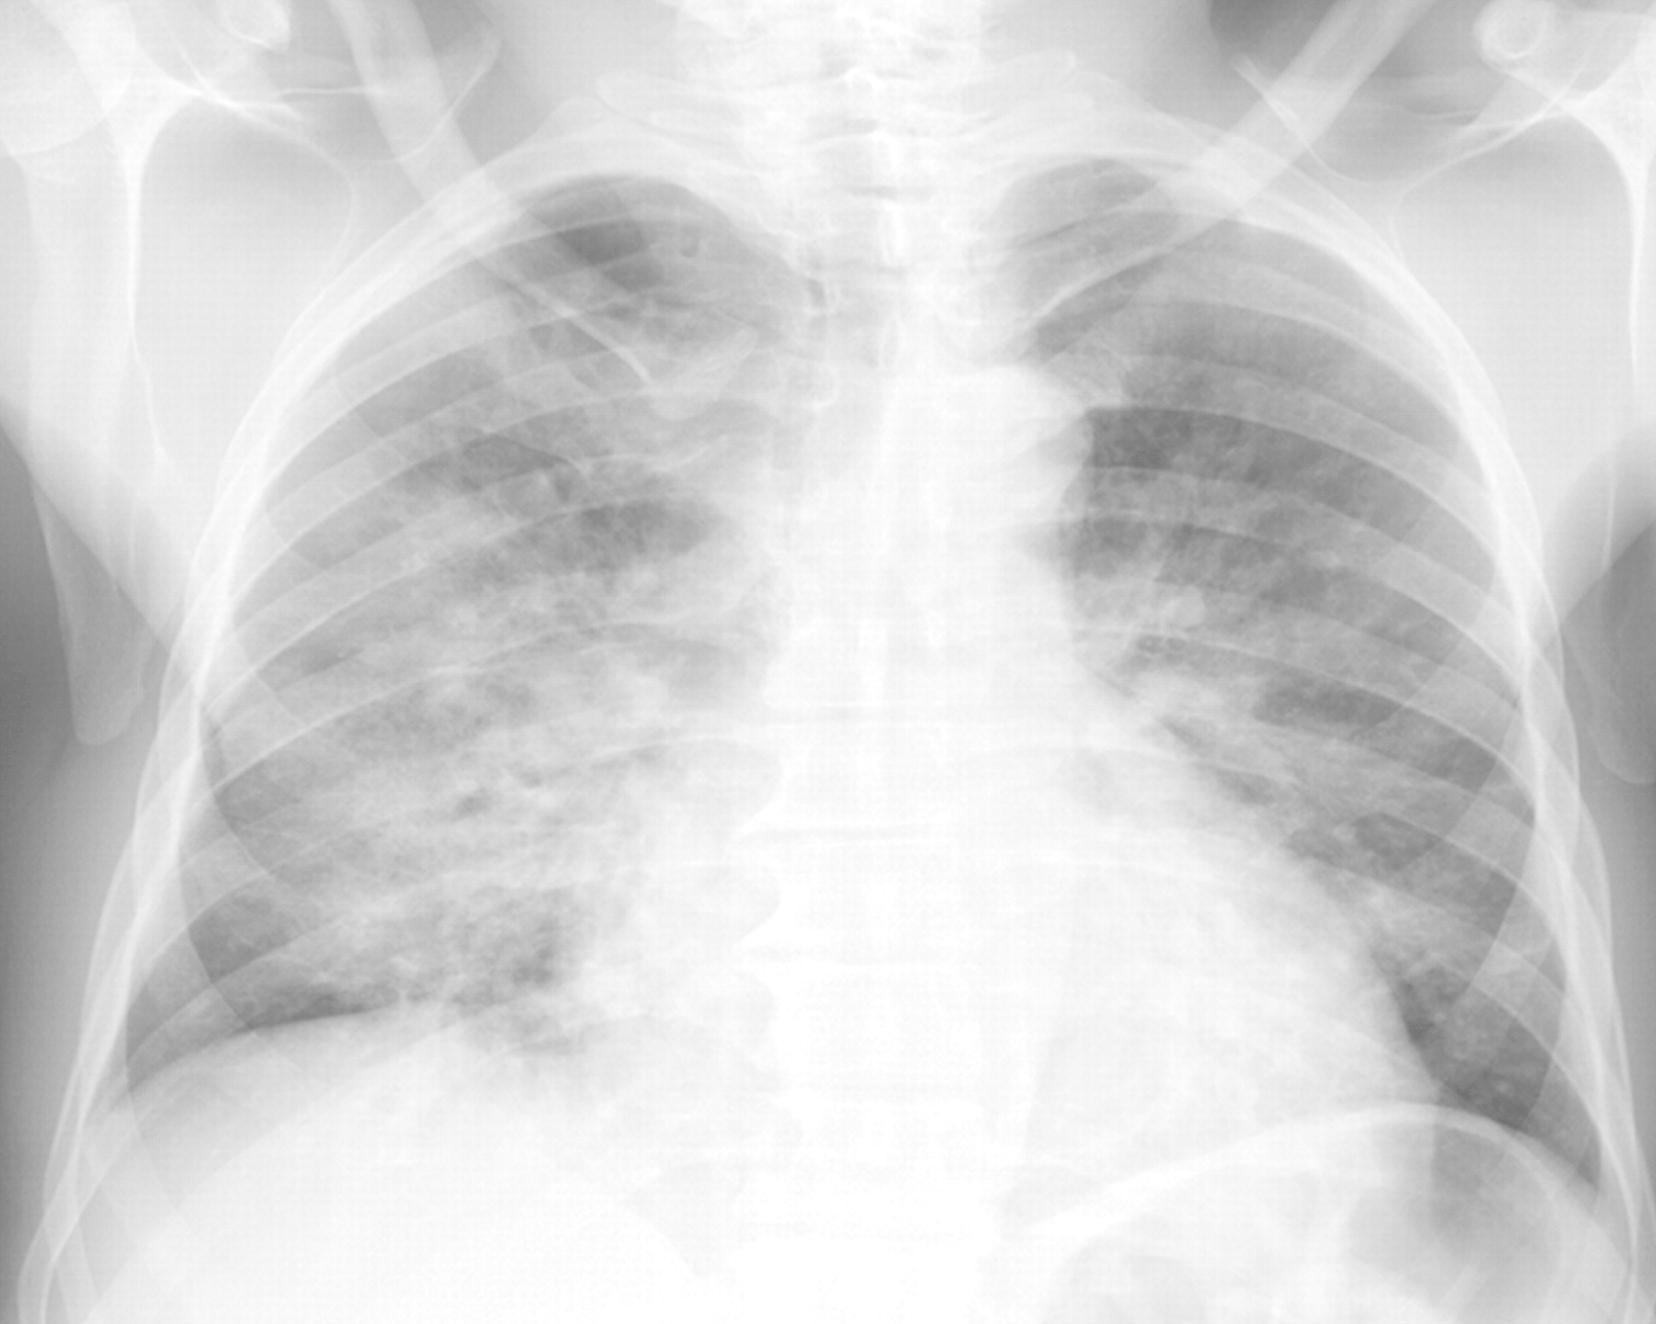 Chest X-ray of patient with acute chest syndrome (source)